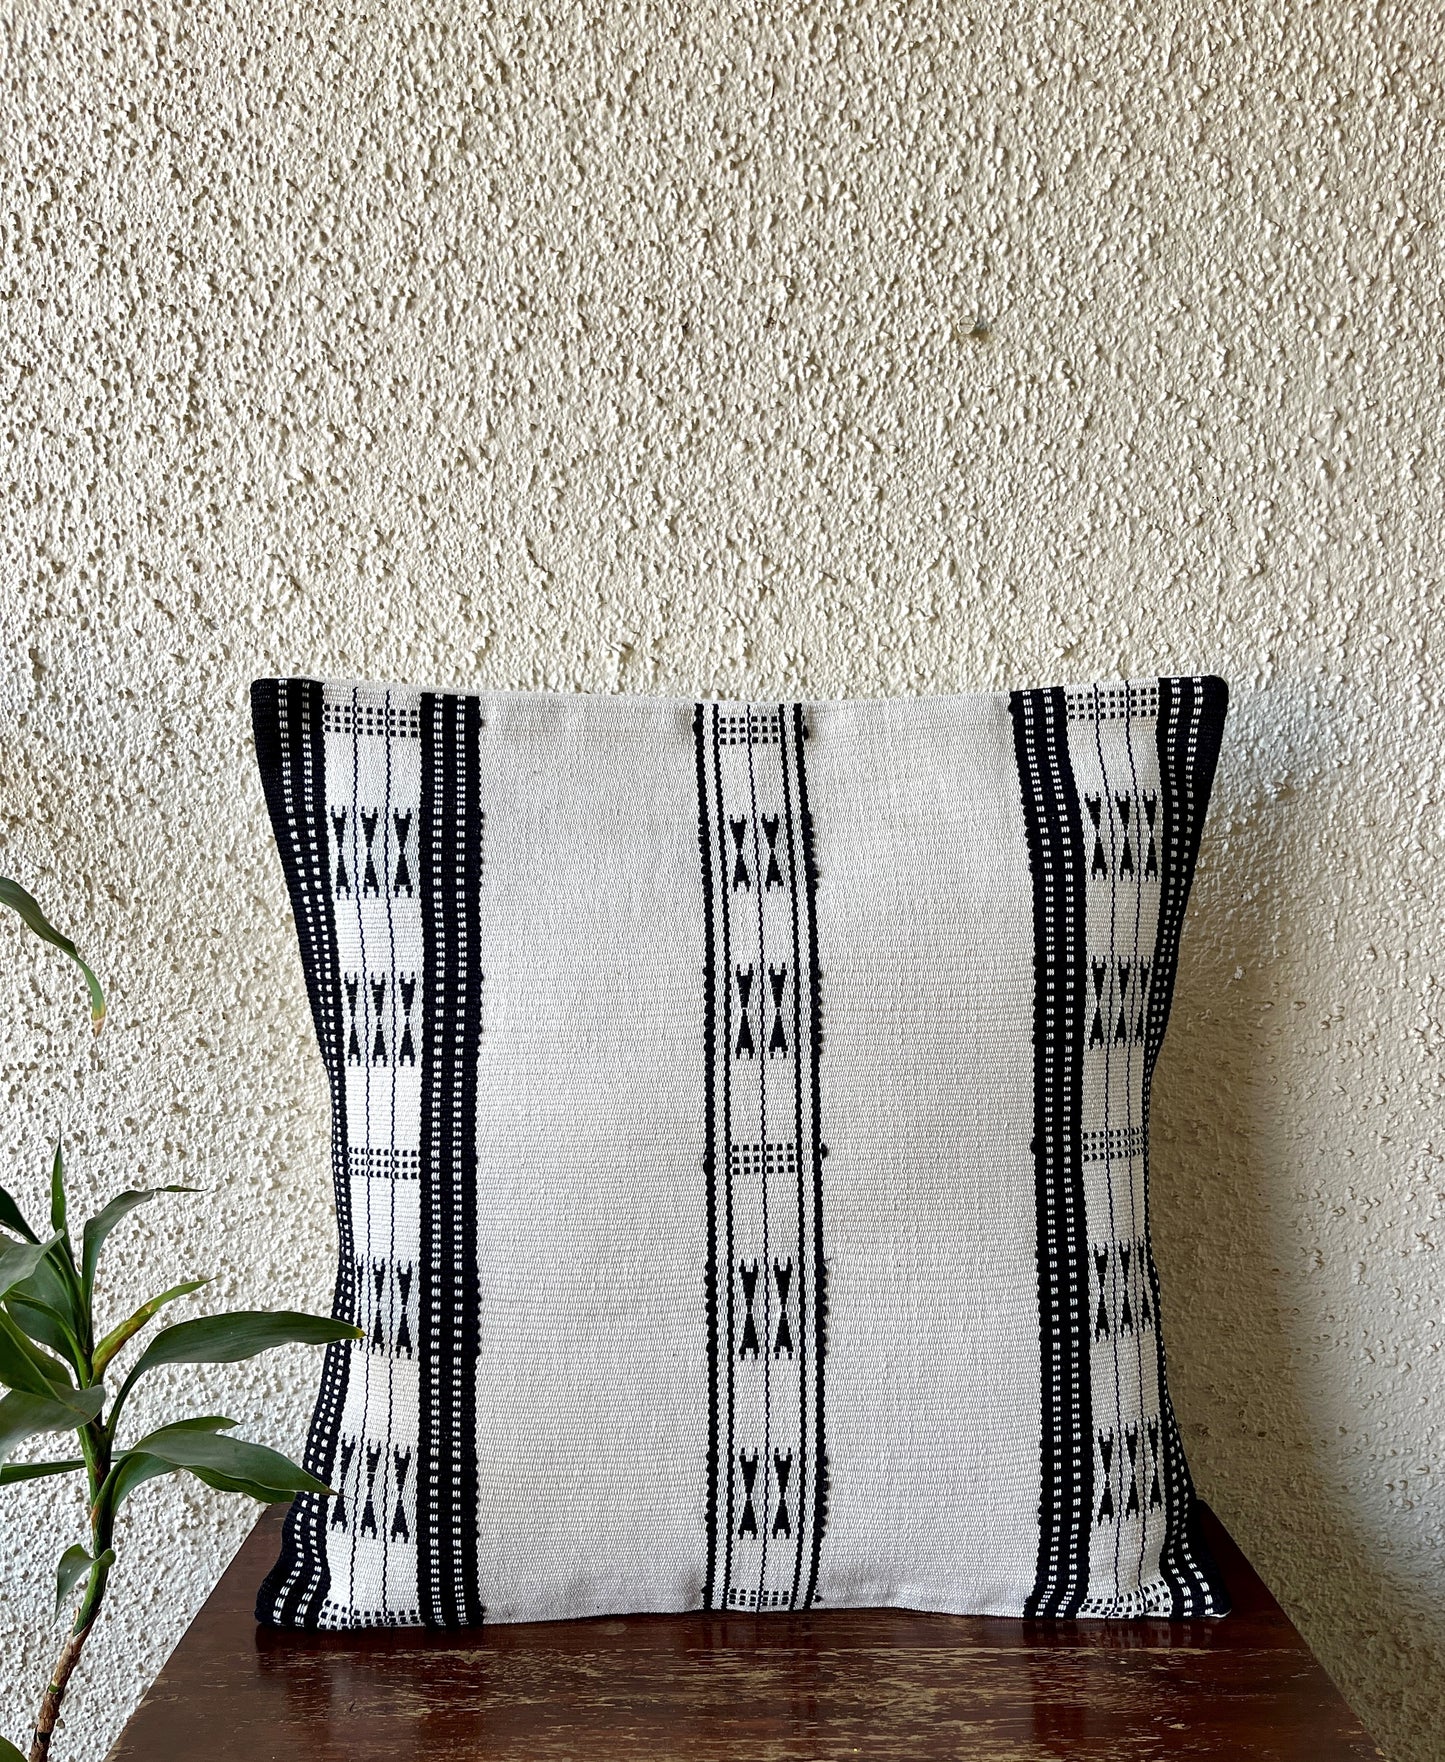 Chizami Weaves - Loin Loom Handwoven Cushion Cover Set in White with Black Motifs (Set of 4)